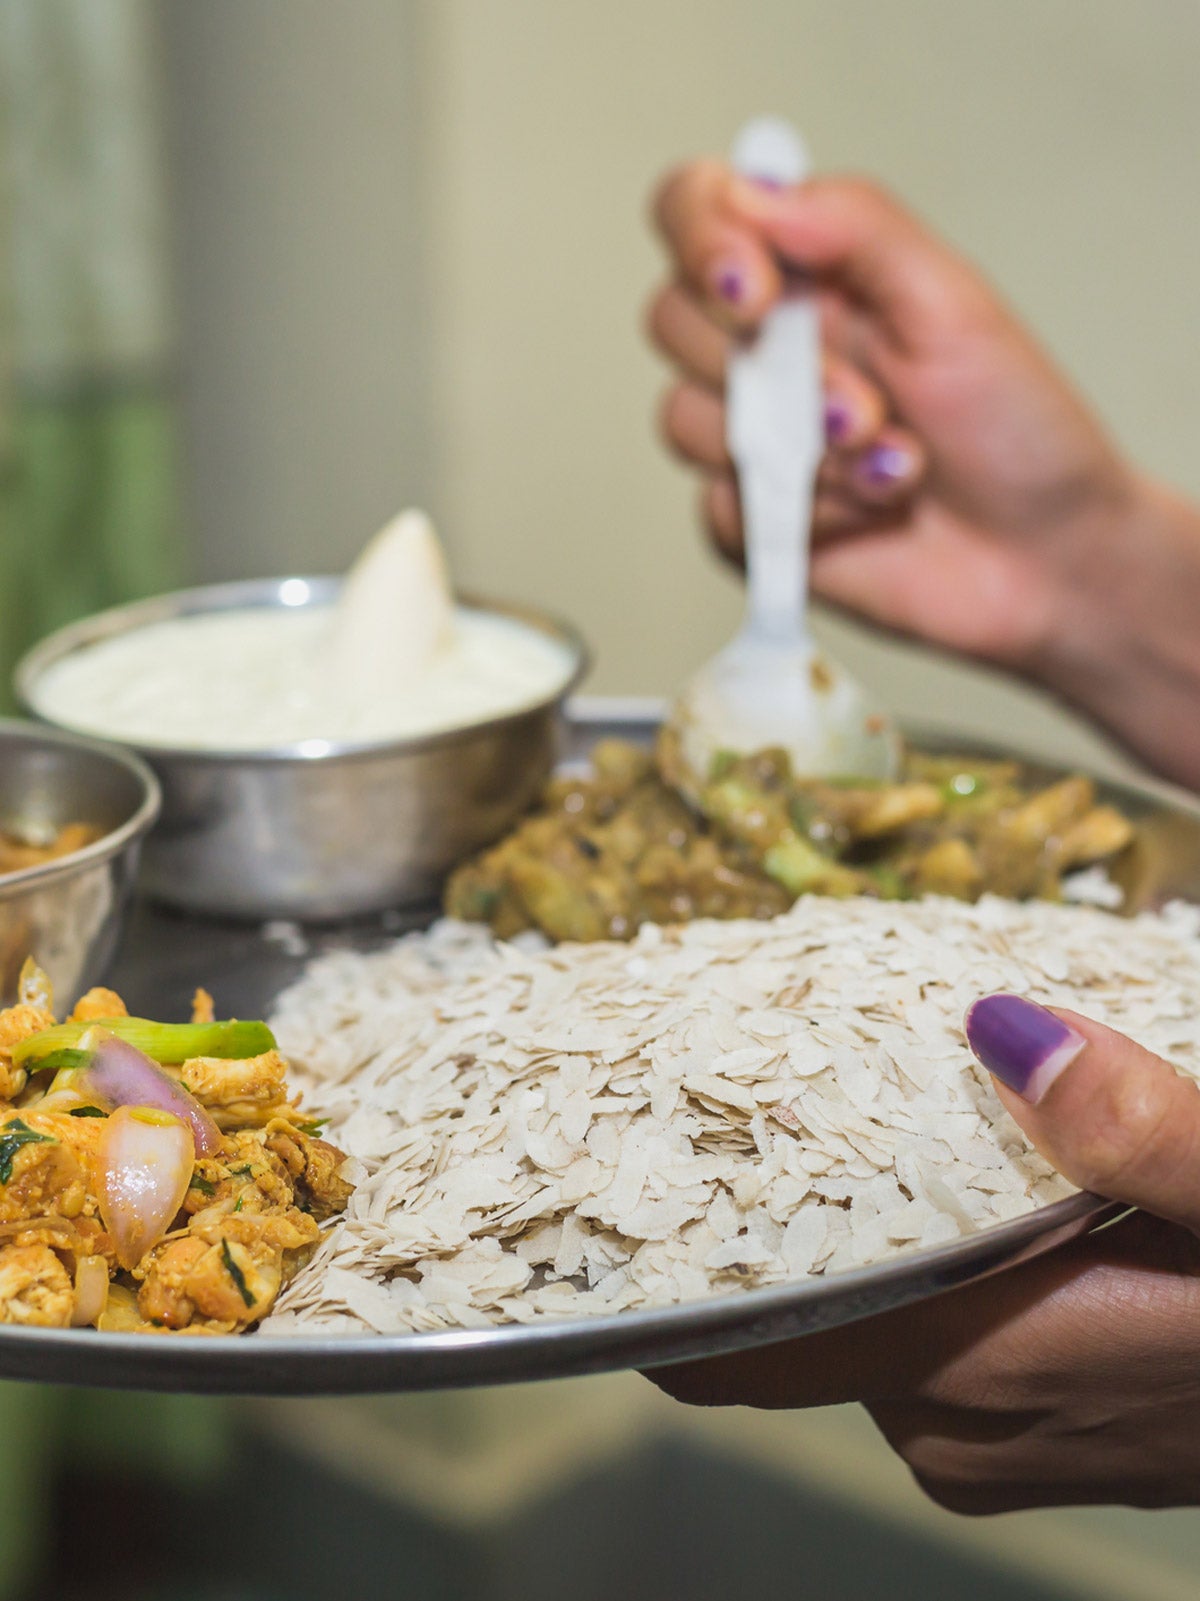 Two female hands hold a mental plate of Nepali food with Dar and sauces.